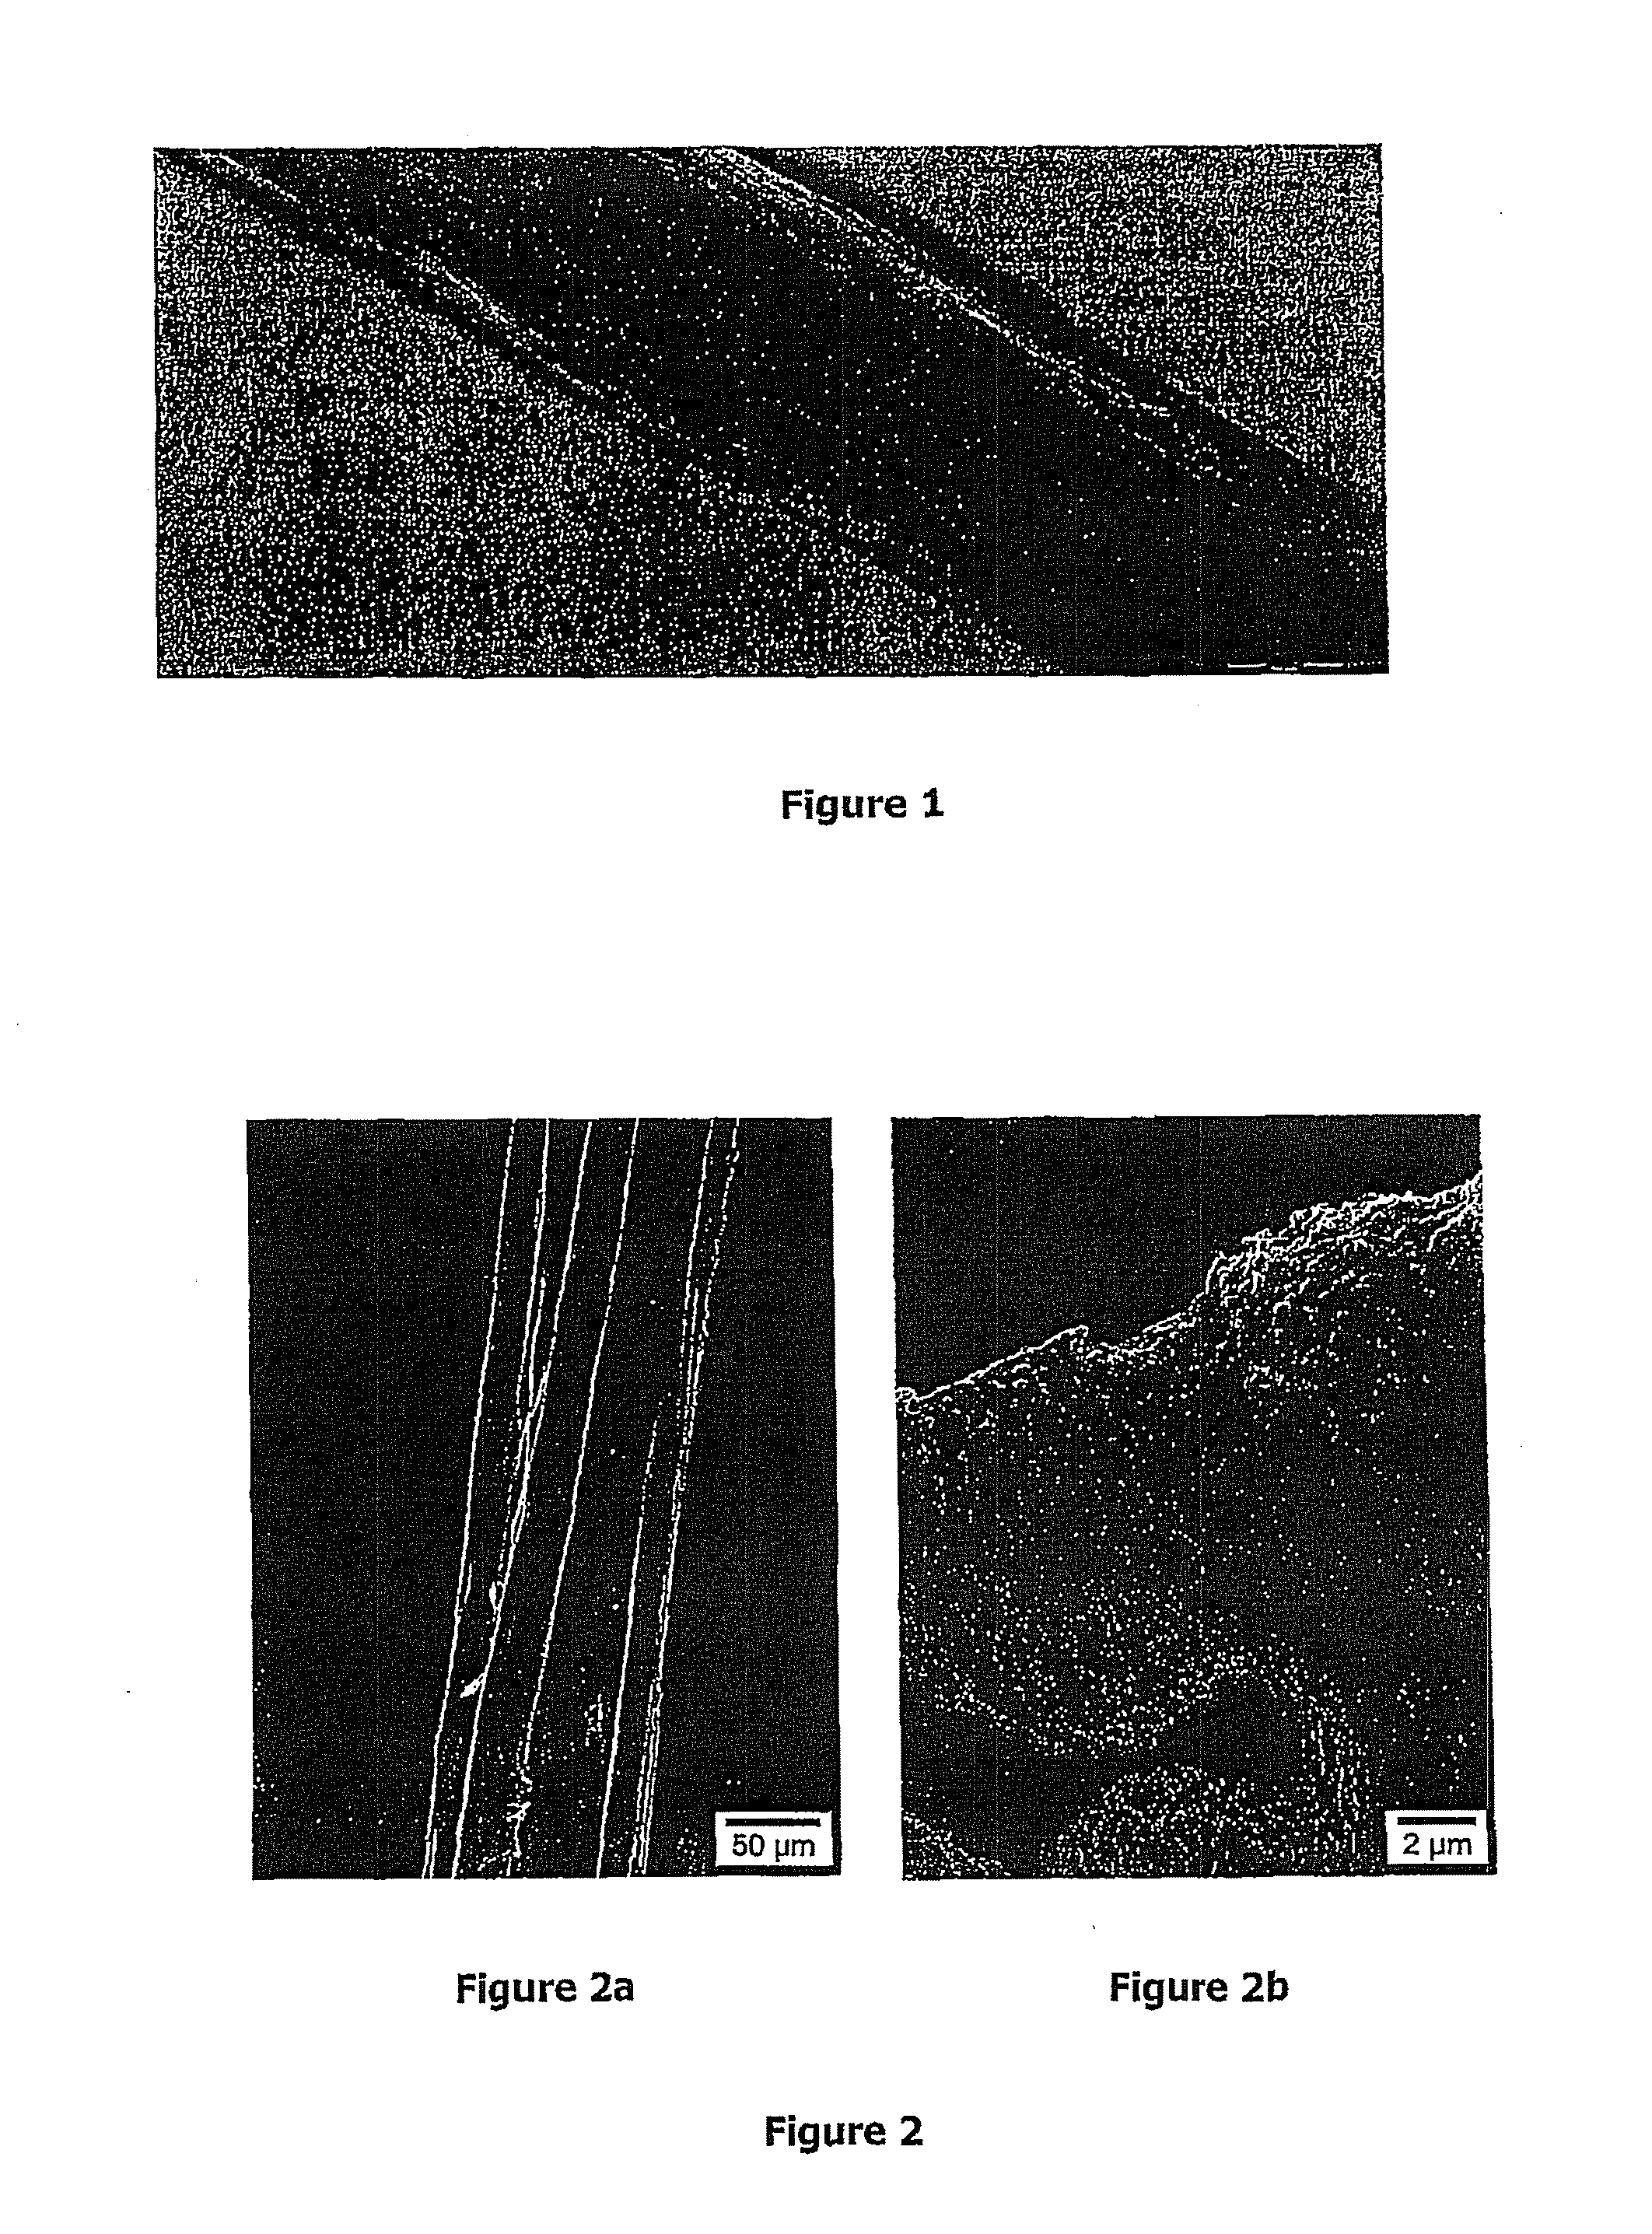 Filament based on hyaluronic acid in the form of free acid and method for obtaining it